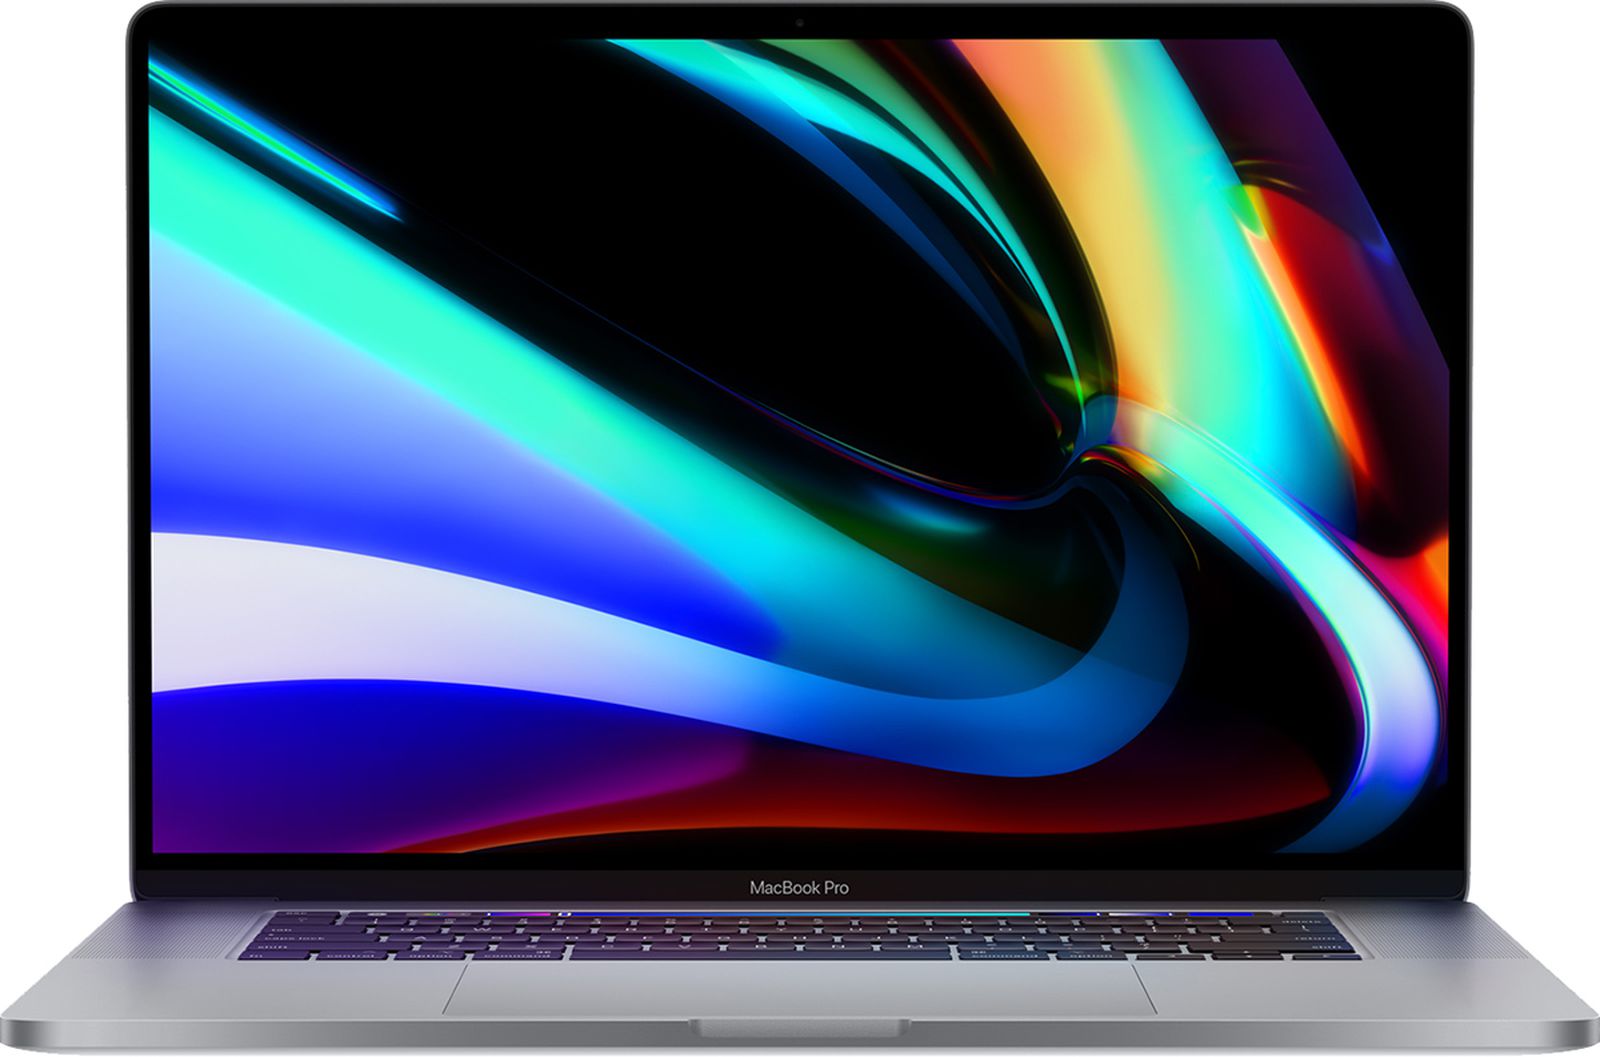 Kuo: new MacBook Pro models with flat edge design, MagSafe, no touchbar and more ports